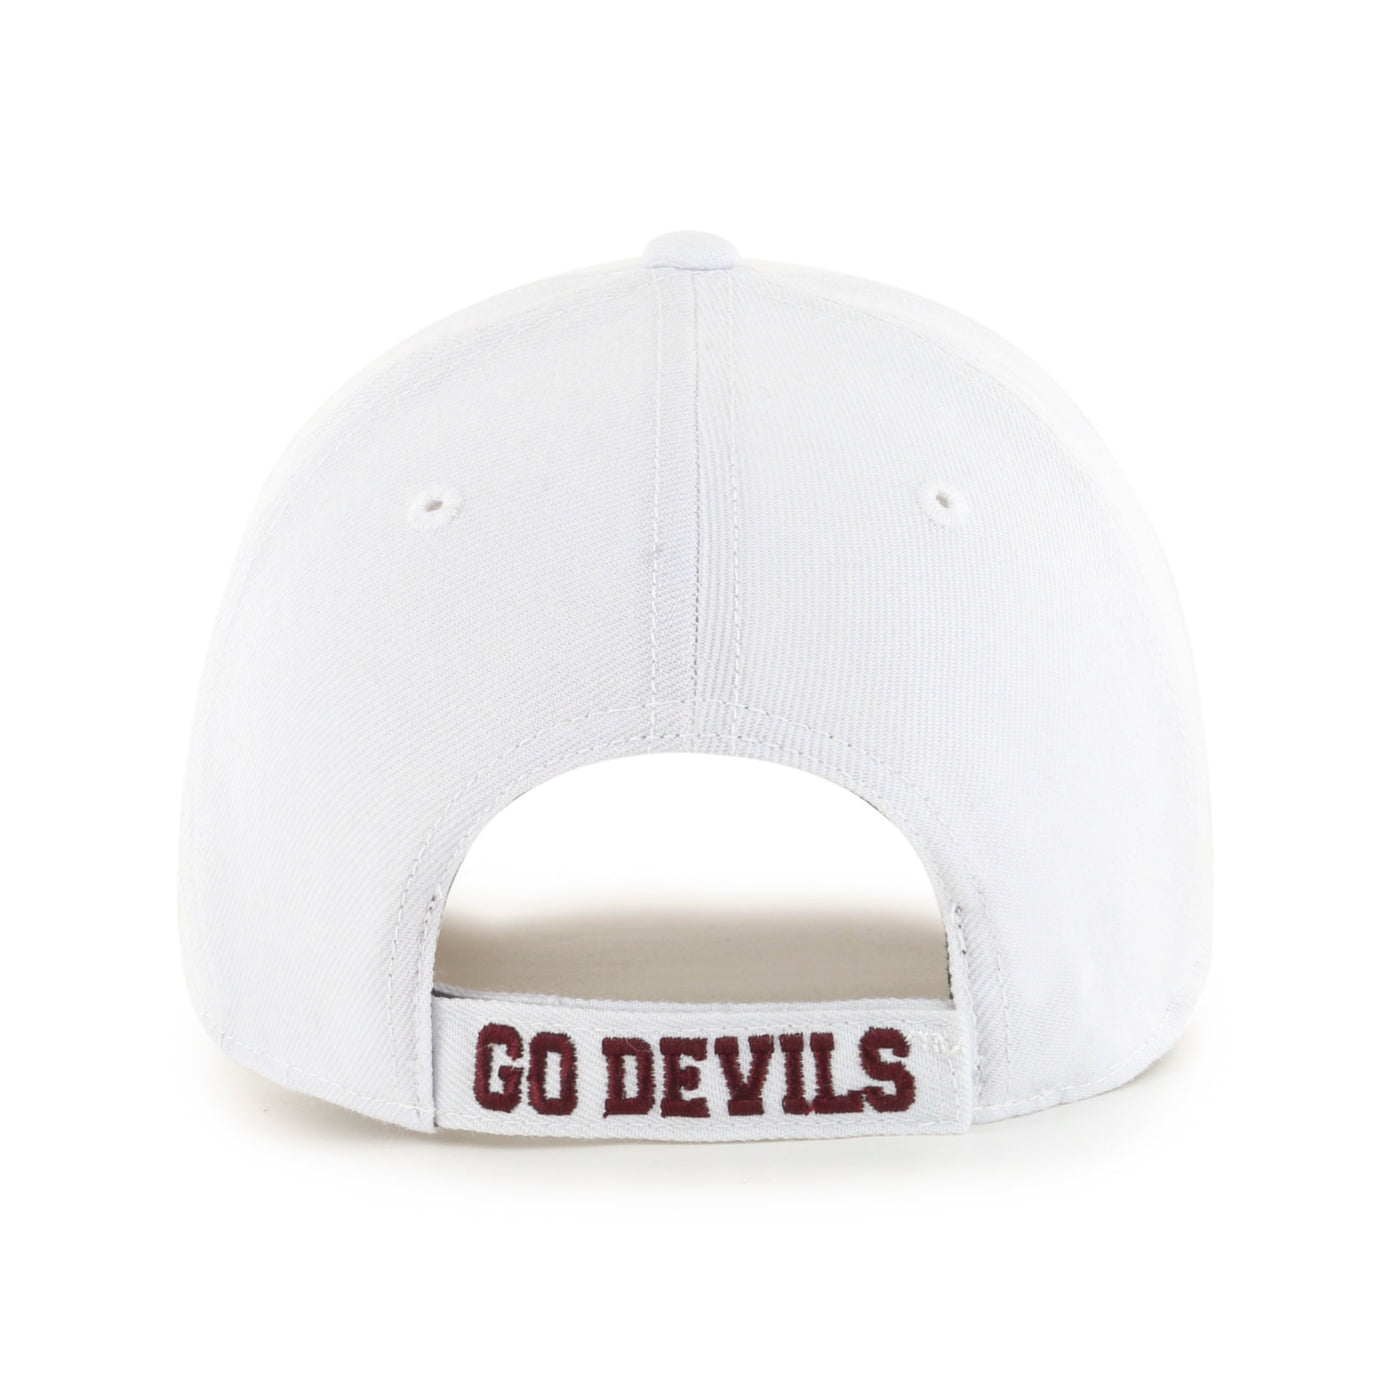 Back of ASU white hat with 'Go Devils' on the adjustable velcro strap